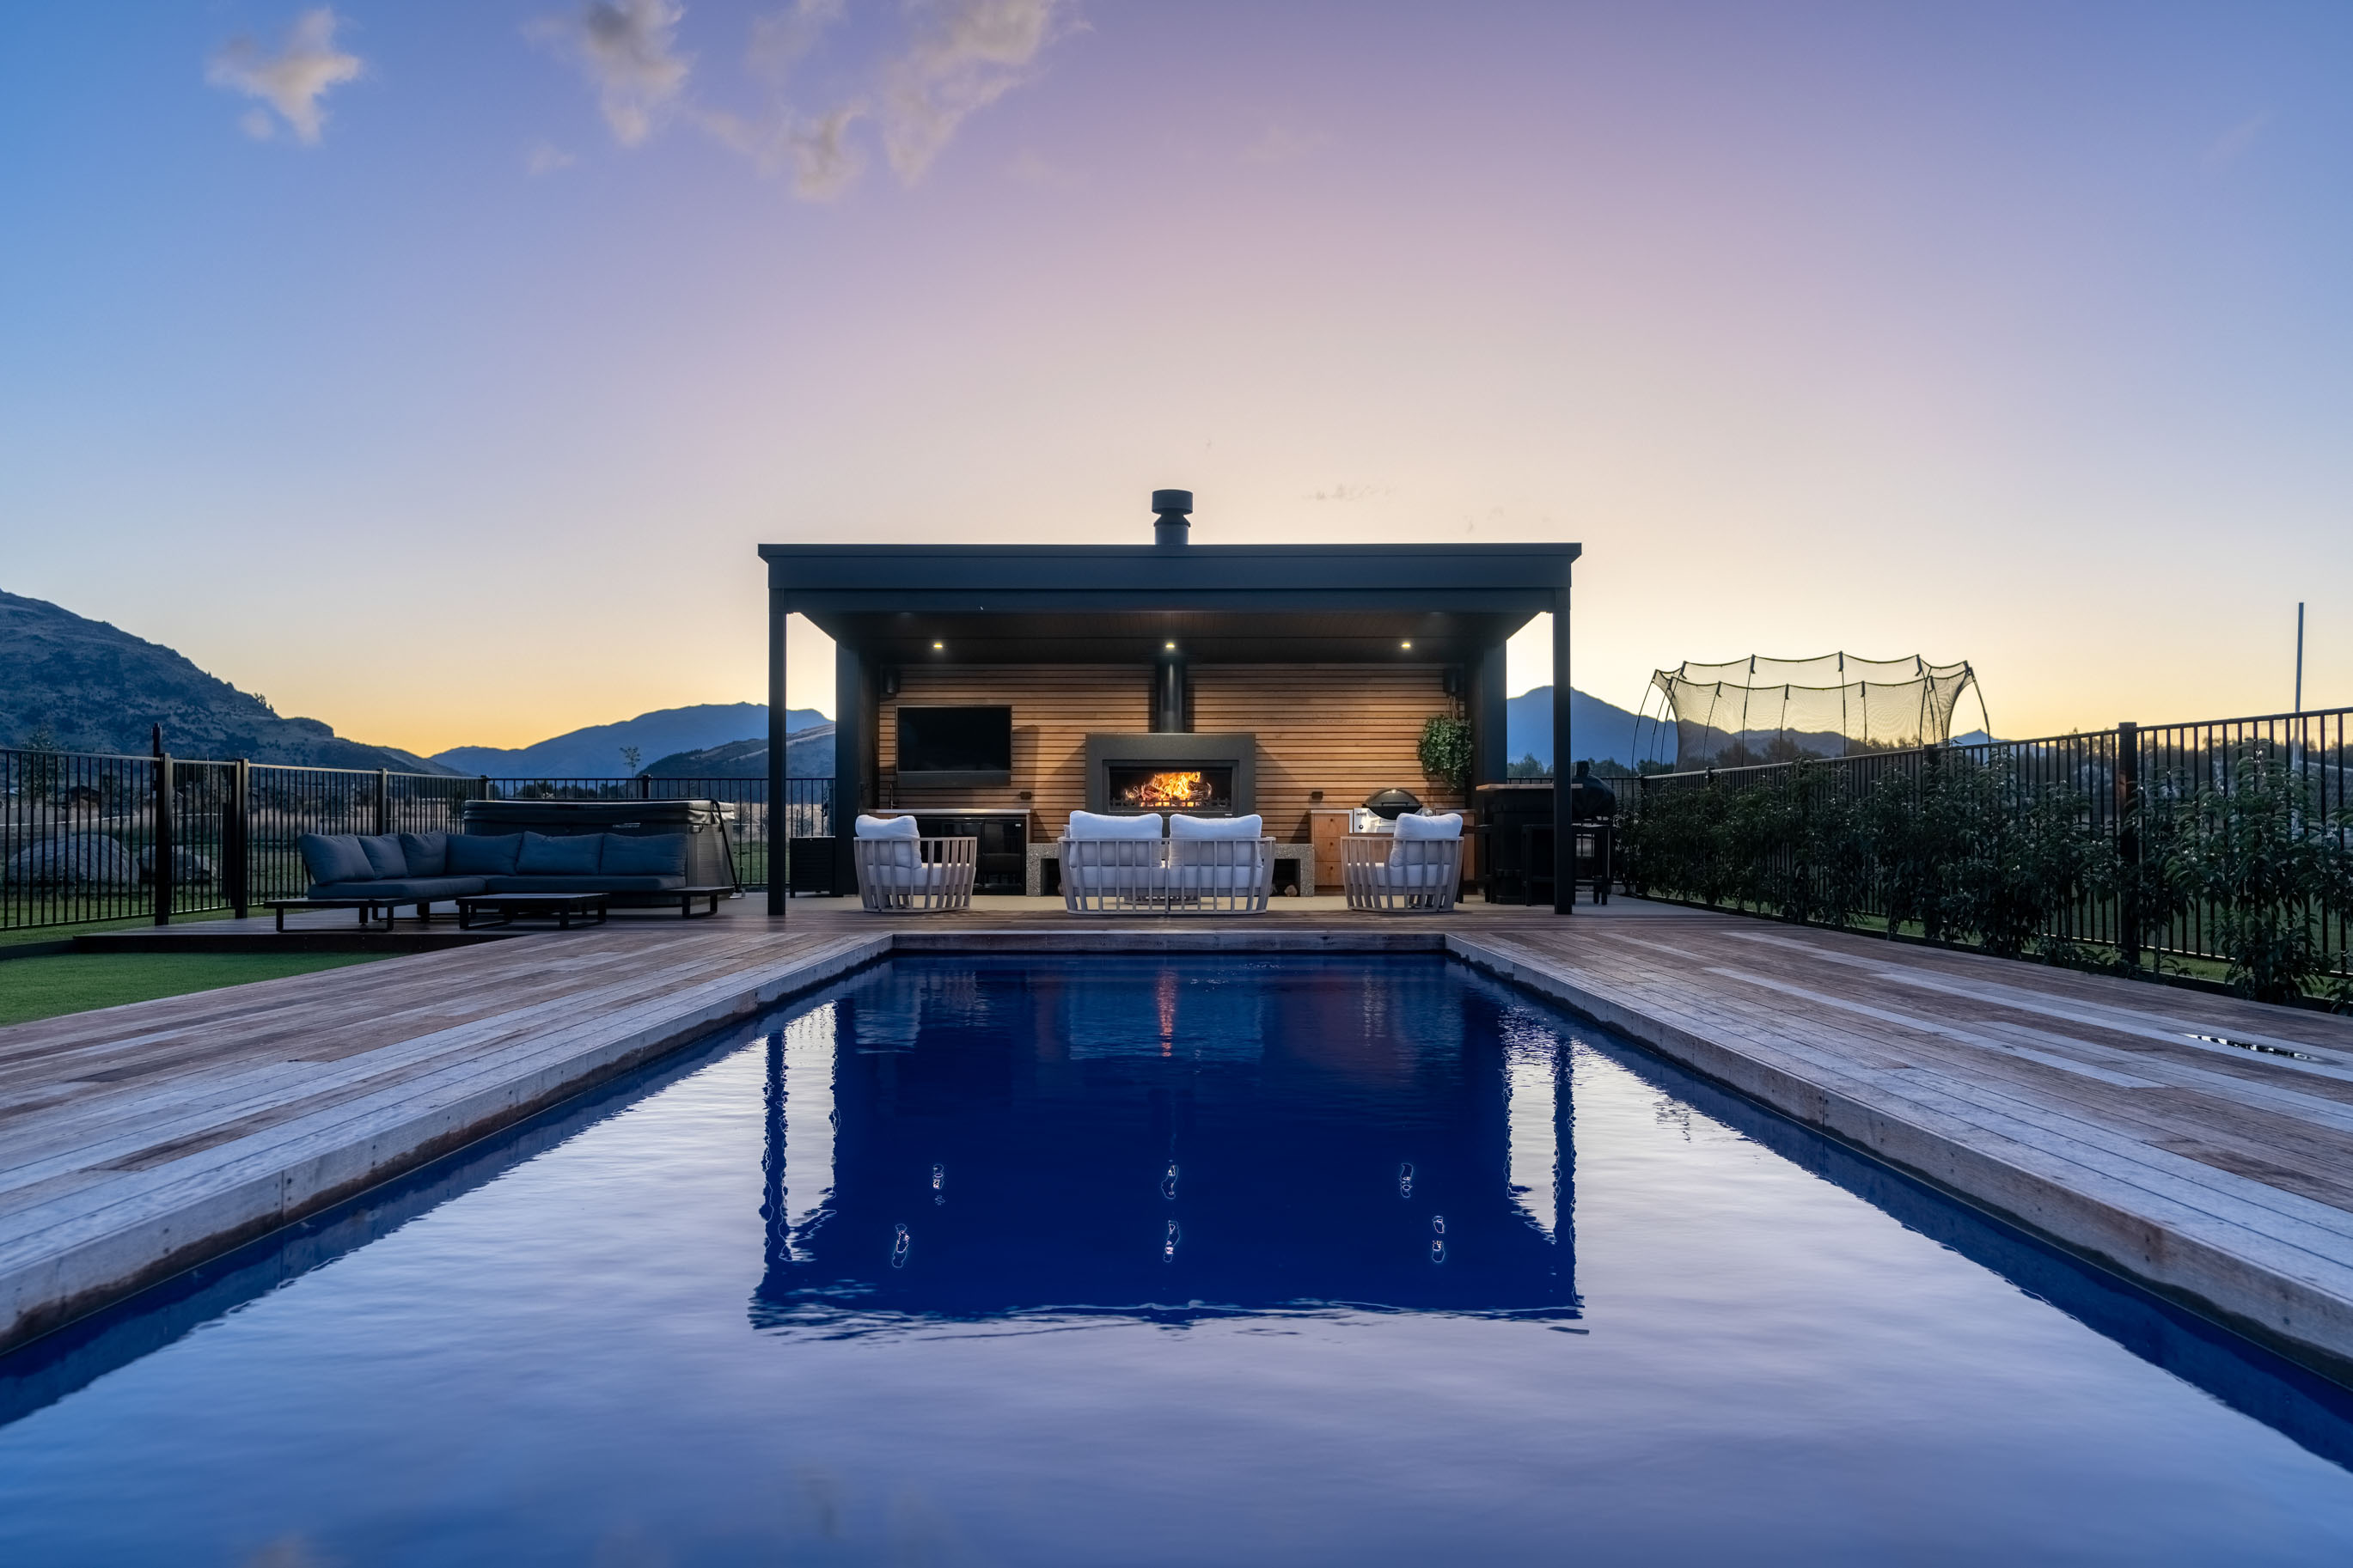 Spa pool vs outdoor fireplace: which is better?